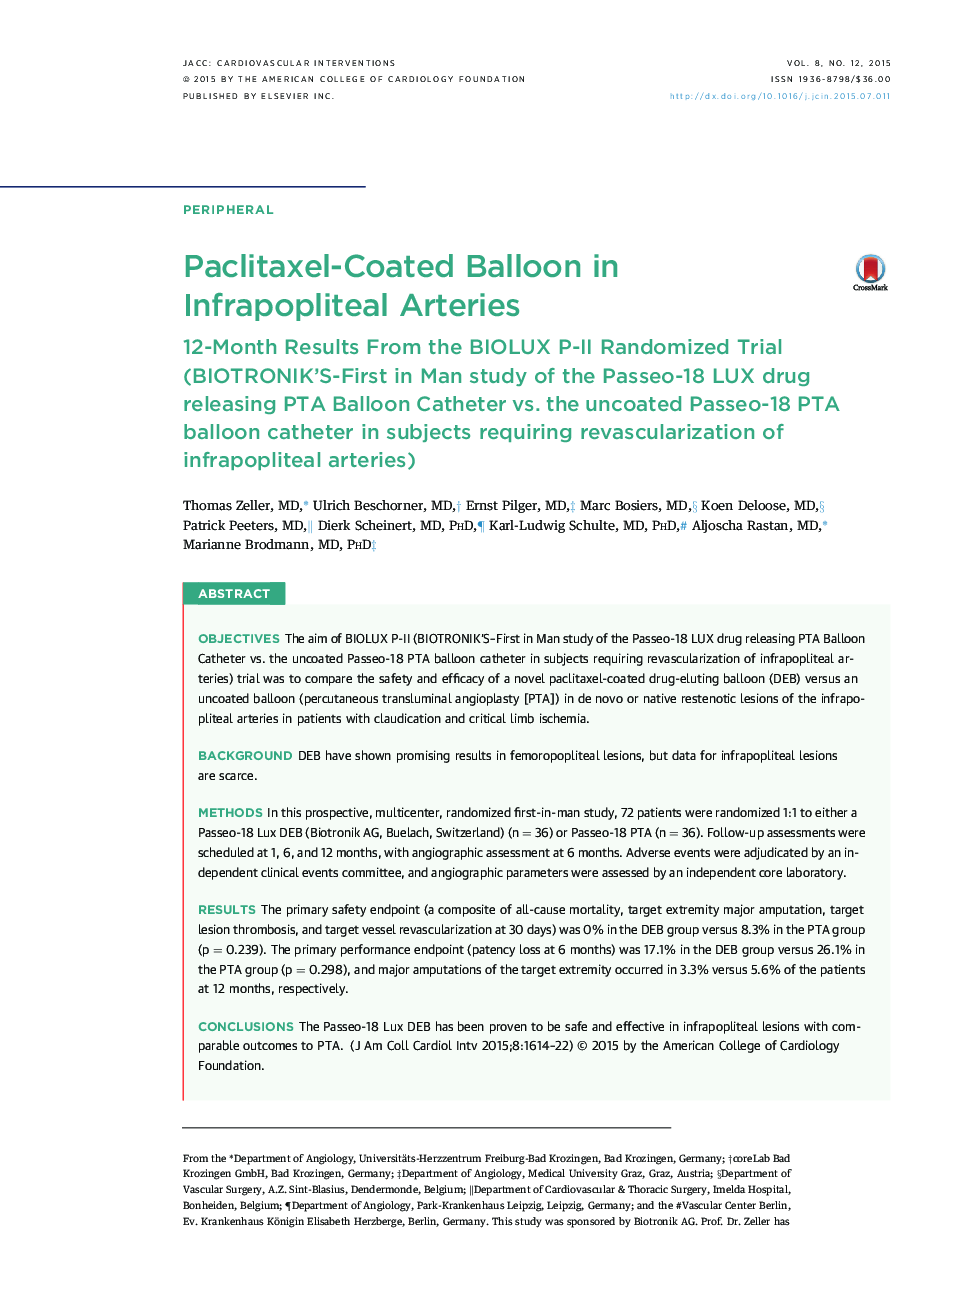 Paclitaxel-Coated Balloon in Infrapopliteal Arteries : 12-Month Results From the BIOLUX P-II Randomized Trial (BIOTRONIK'S-First in Man study of the Passeo-18 LUX drug releasing PTA Balloon Catheter vs. the uncoated Passeo-18 PTA balloon catheter in subje